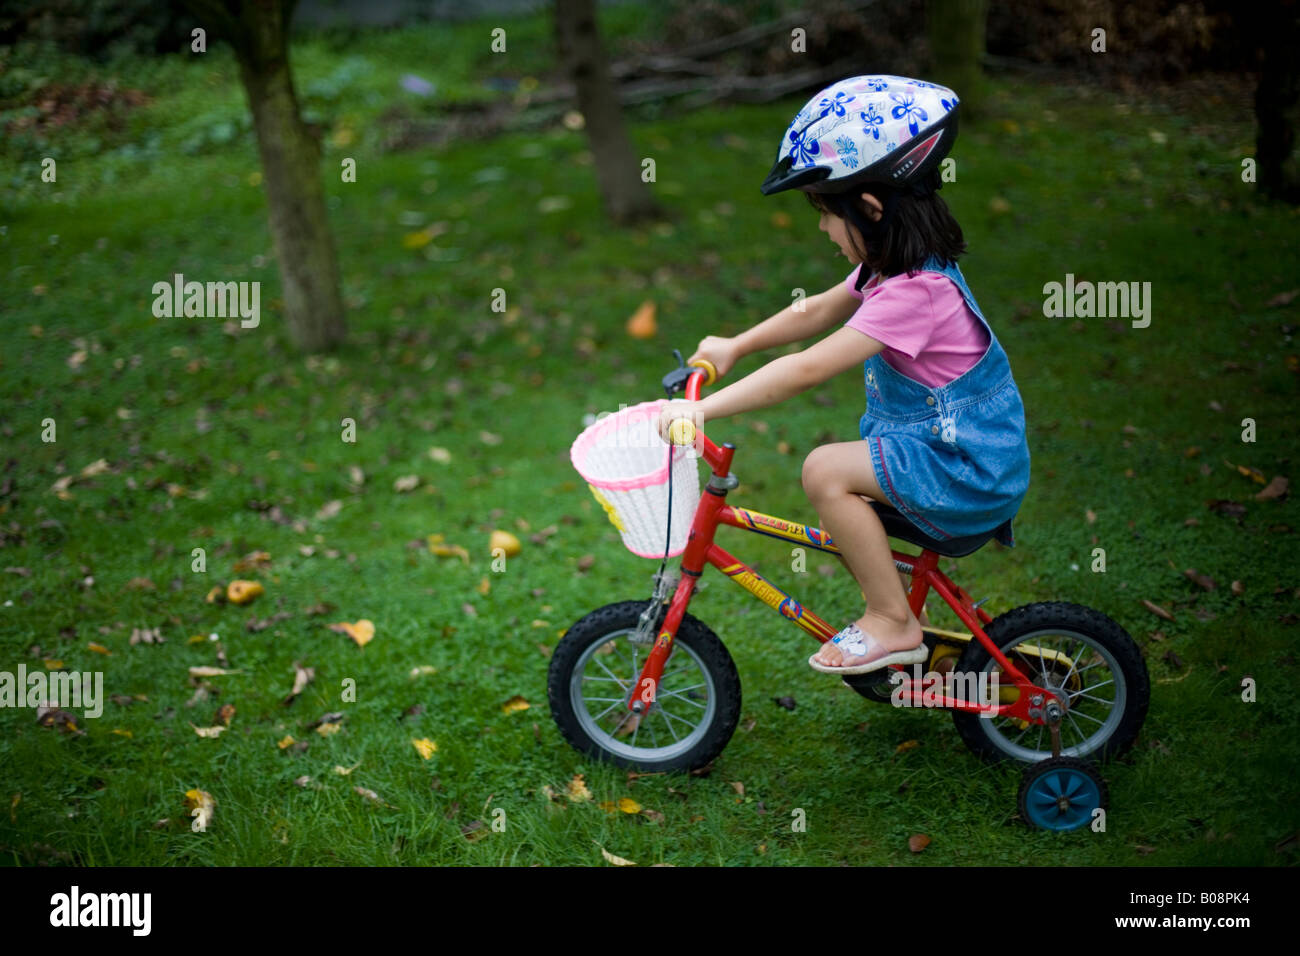 Girl aged four rides bike with training wheels and basket around the garden on a wet day Stock Photo